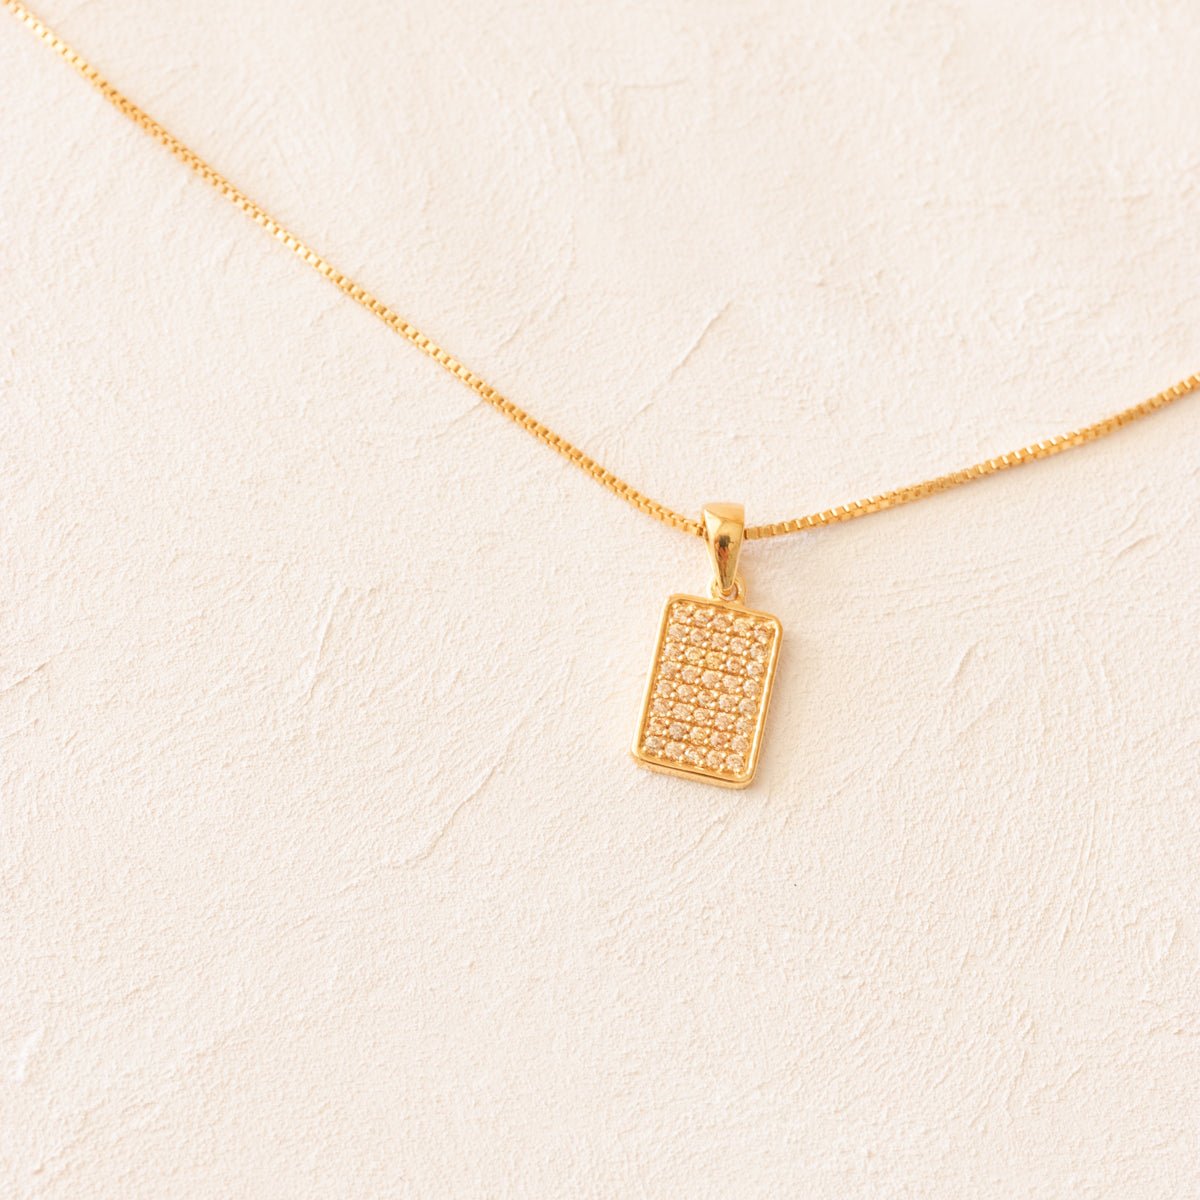 LOVE DAINTY DOG TAG NECKLACE - PEACH CUBIC ZIRCONIA &amp; GOLD - SO PRETTY CARA COTTER